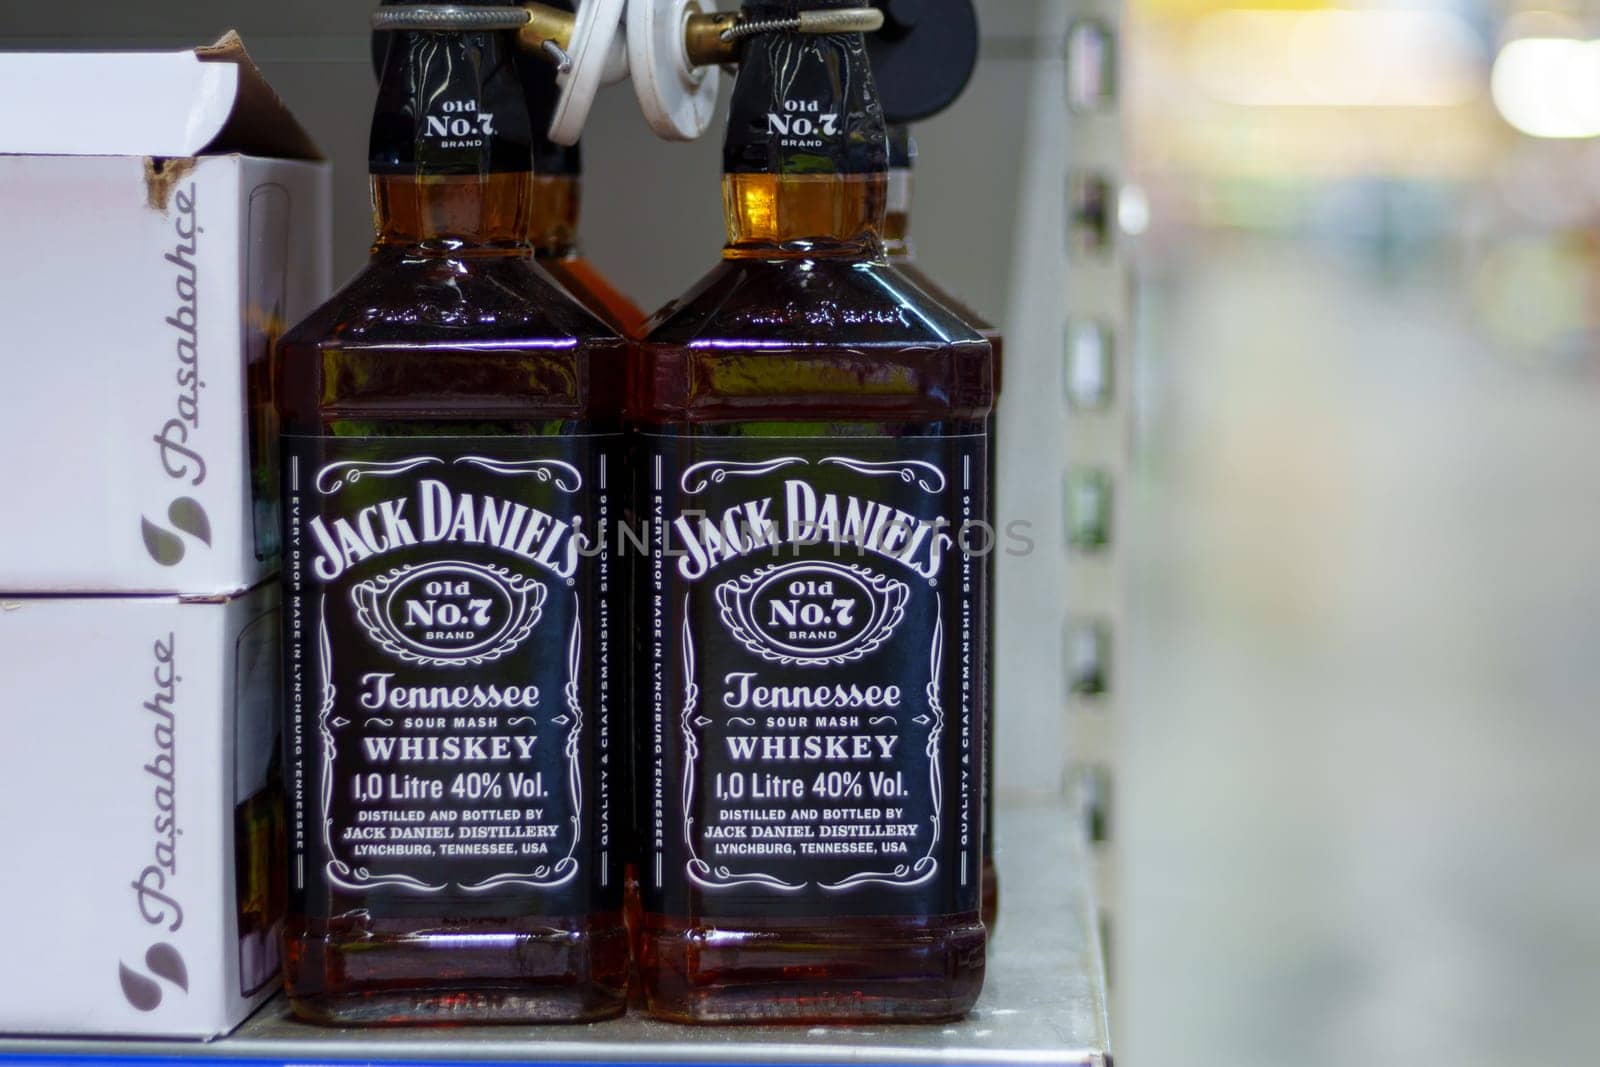 Tyumen, Russia-March 02, 2024: Bottles of Jack Daniels Tennessee Whiskey are showcased prominently on a retail shelf.